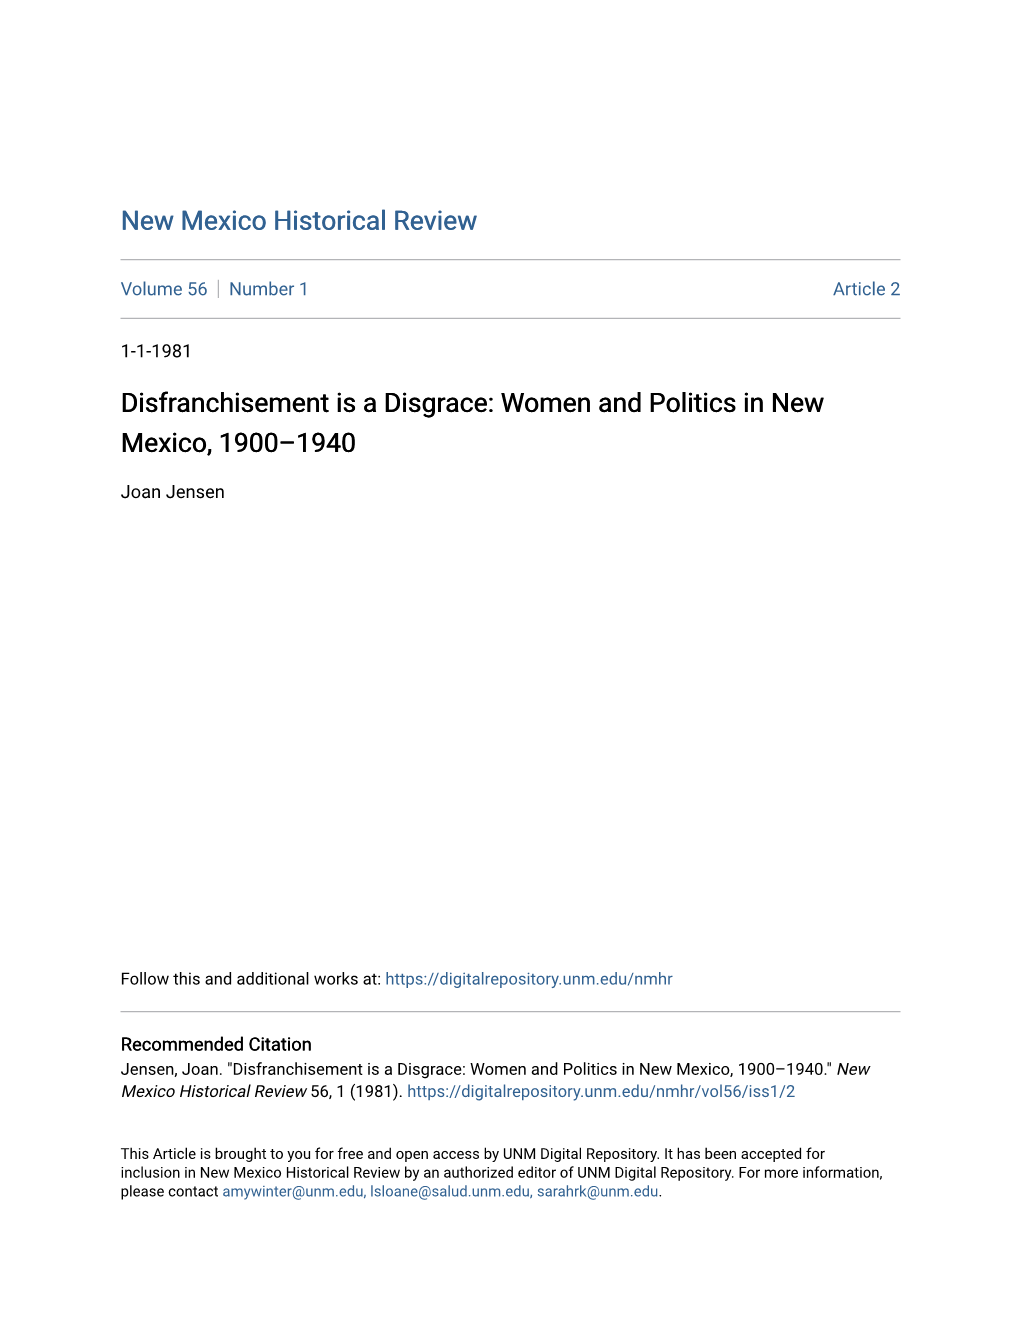 Disfranchisement Is a Disgrace: Women and Politics in New Mexico, 1900Â•Fi1940